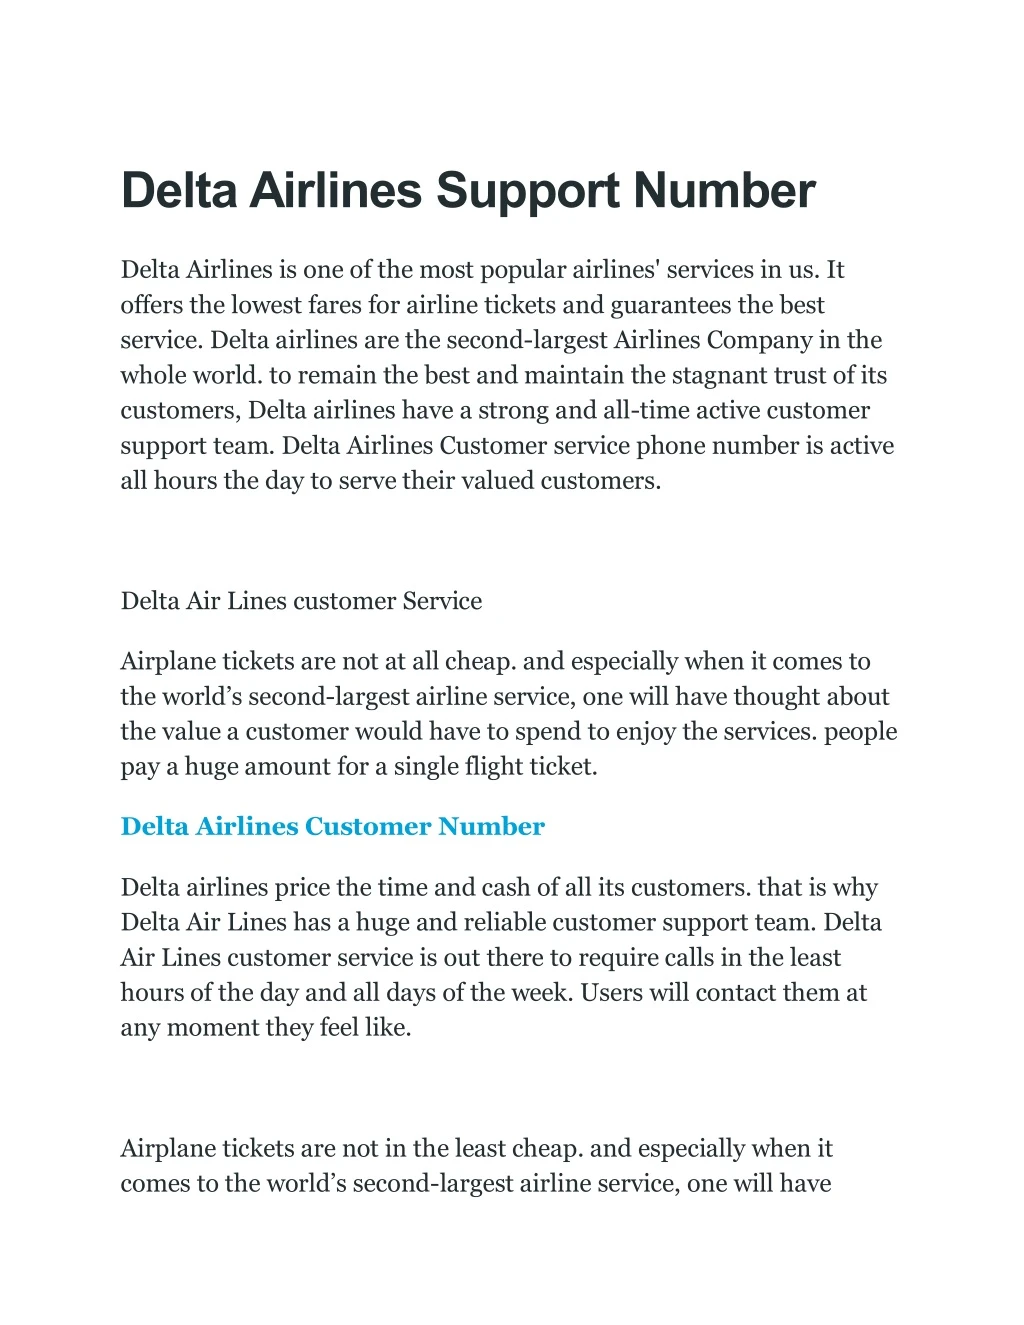 delta airlines support number